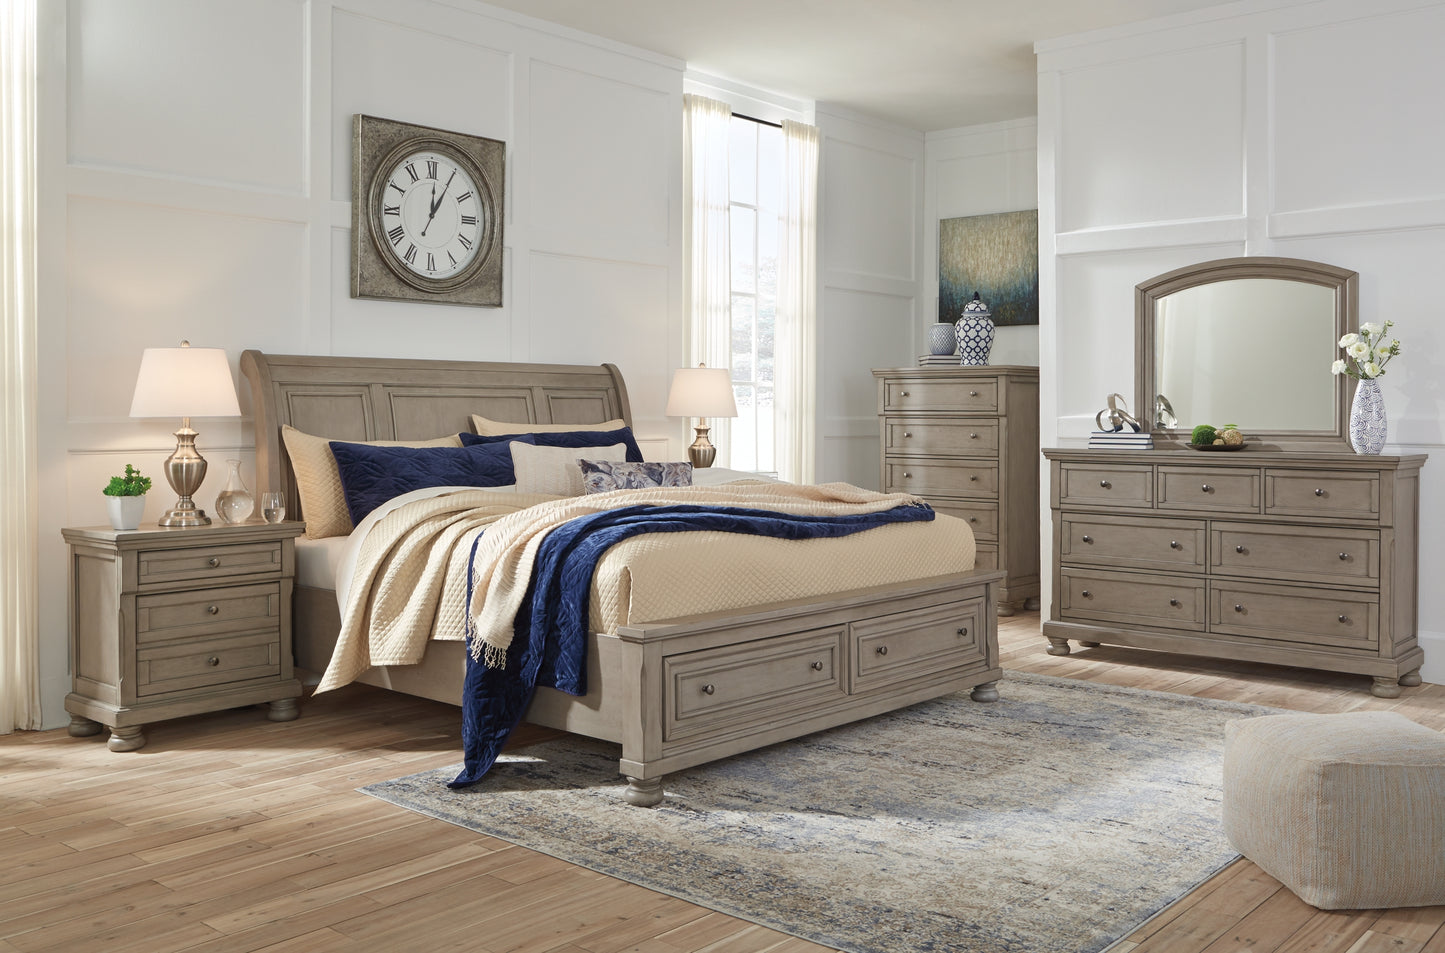 Lettner King Sleigh Bed with 2 Storage Drawers with Mirrored Dresser and 2 Nightstands Wilson Furniture (OH)  in Bridgeport, Ohio. Serving Bridgeport, Yorkville, Bellaire, & Avondale